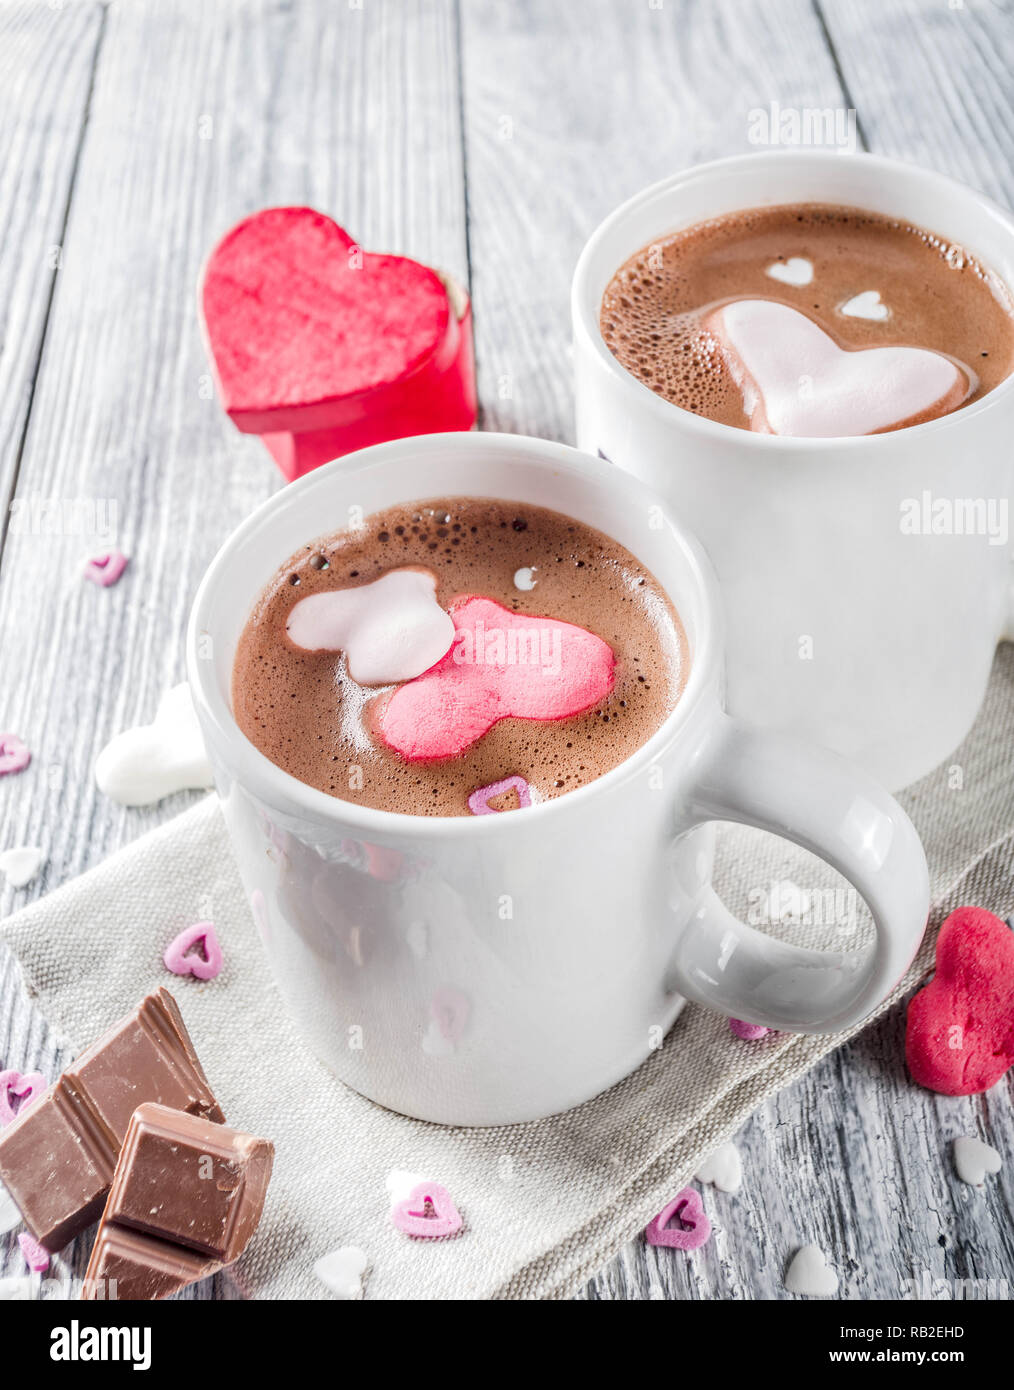 https://c8.alamy.com/comp/RB2EHD/valentines-day-treat-ideas-two-cups-hot-chocolate-drink-with-marshmallow-hearts-red-pink-white-color-with-chocolate-pieces-sugar-sprinkles-old-wood-RB2EHD.jpg